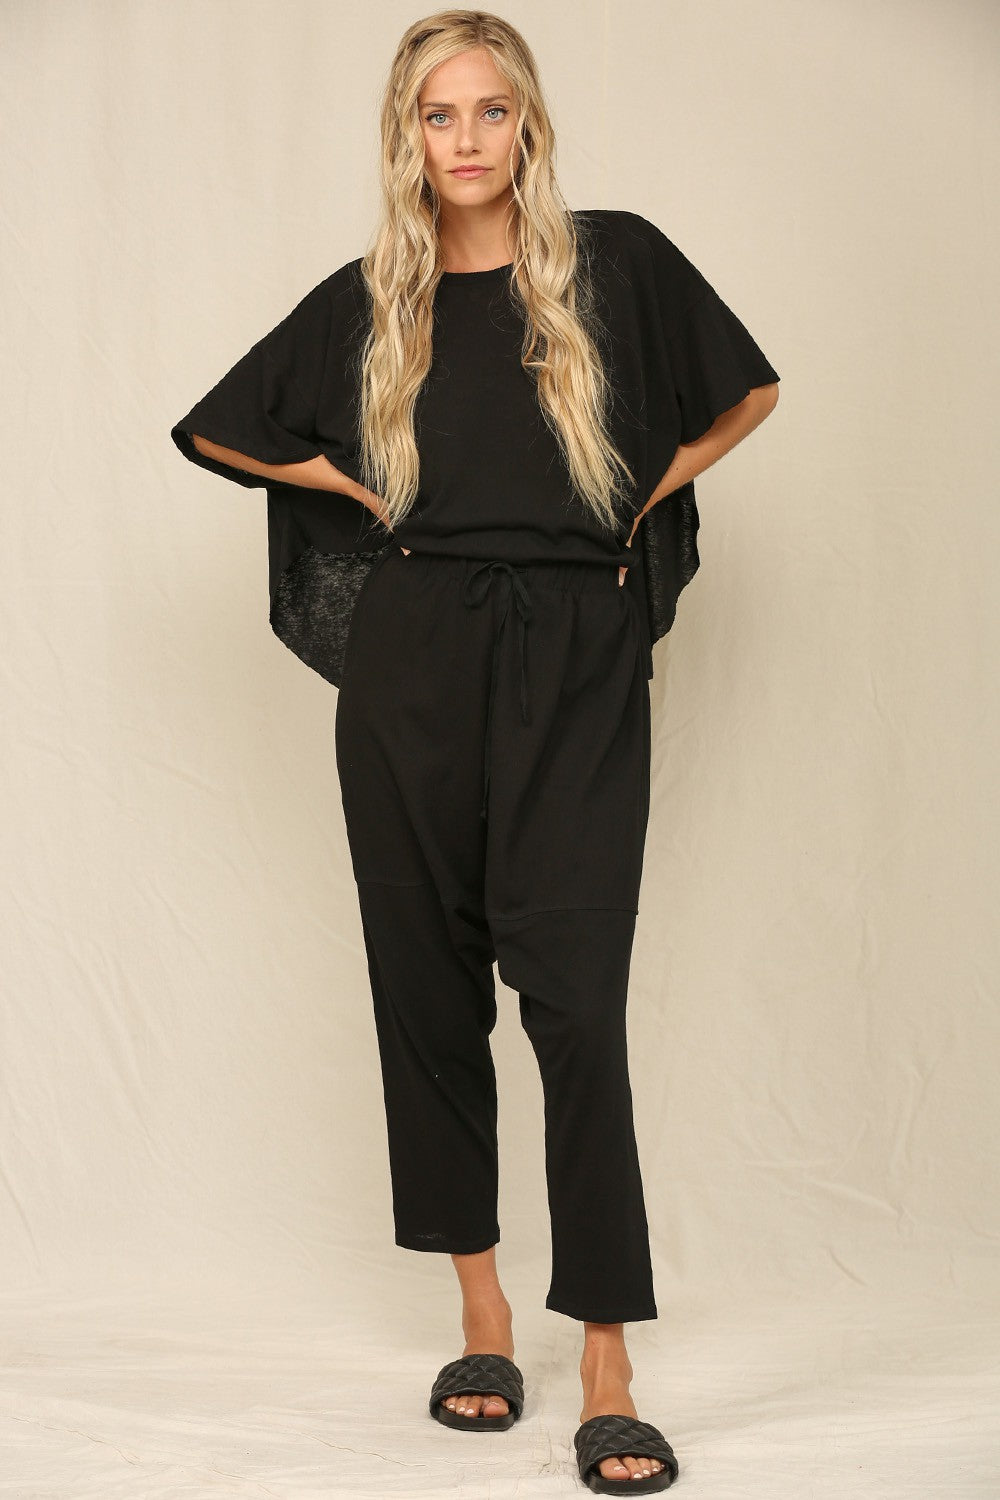 Black Slouchy Silhouette Top And Pants Set